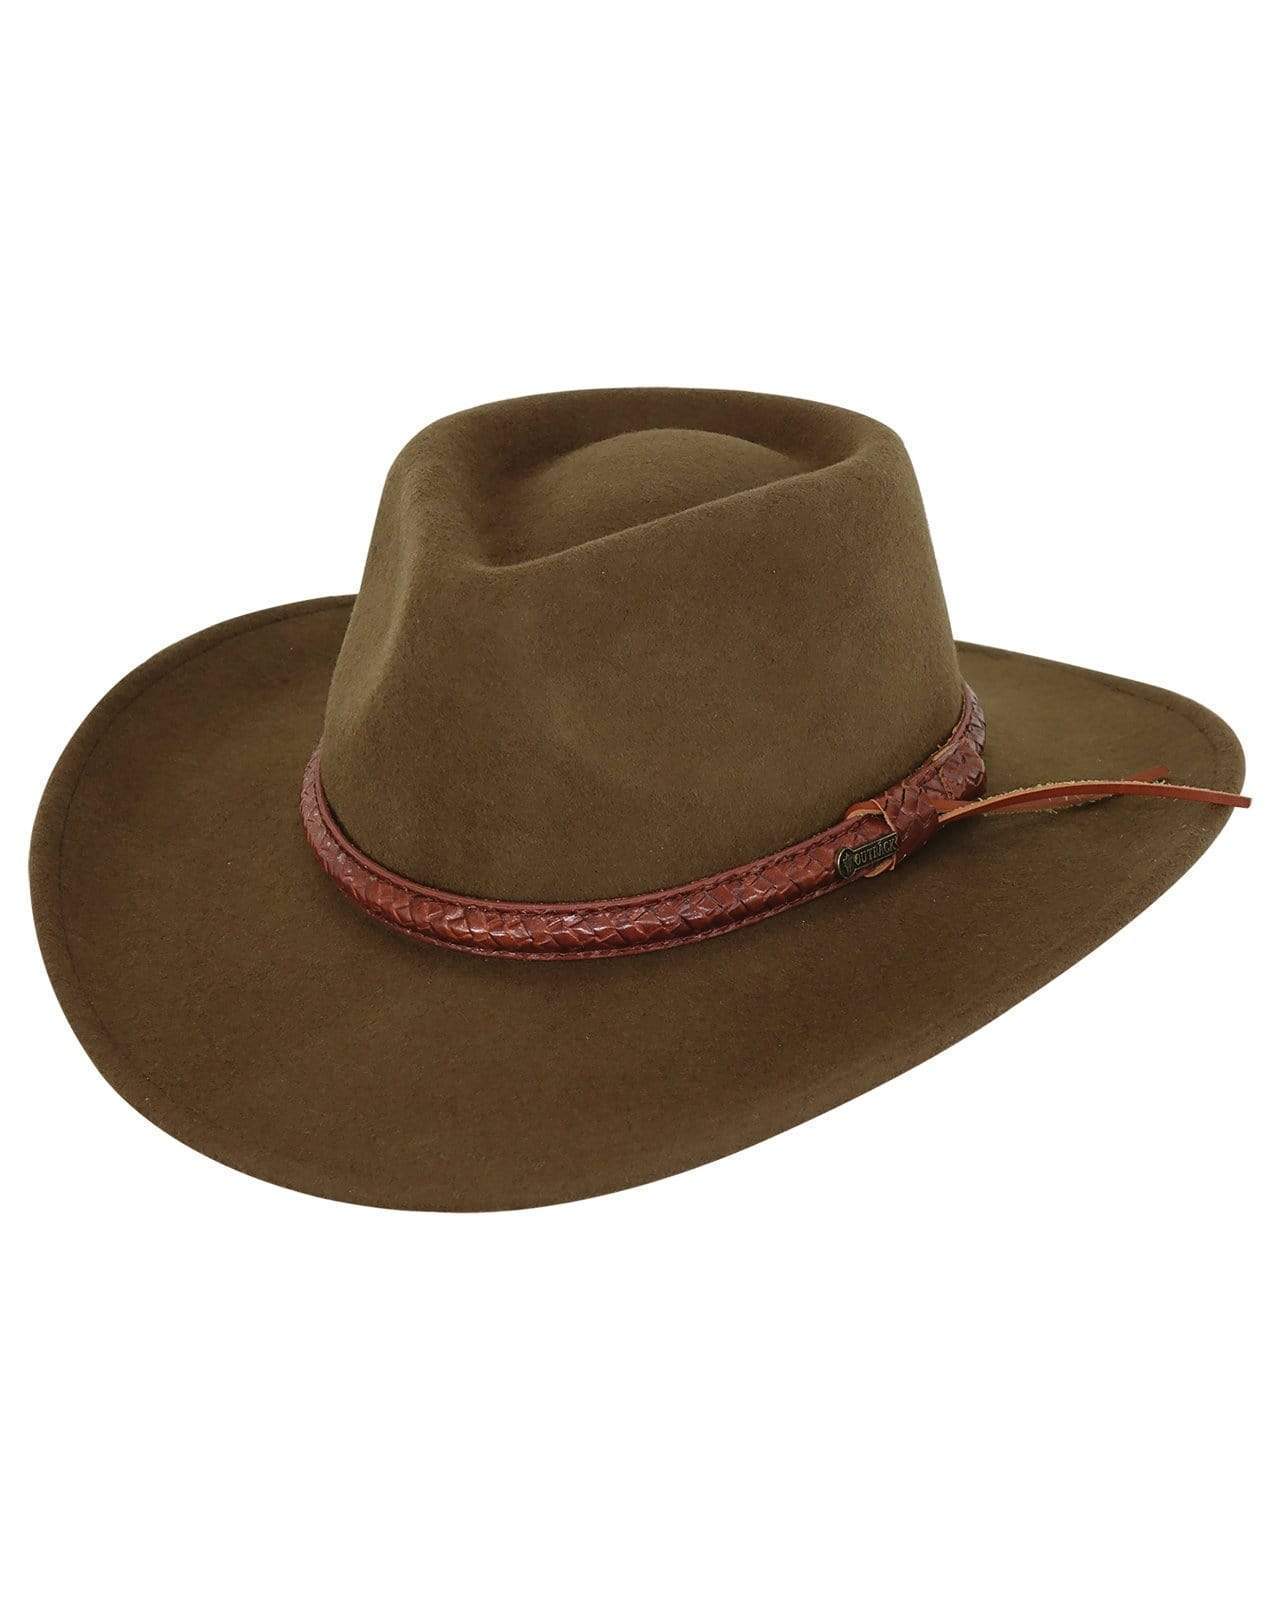 Dusty Rider | Wool Hats by Outback Trading Company | OutbackTrading.com